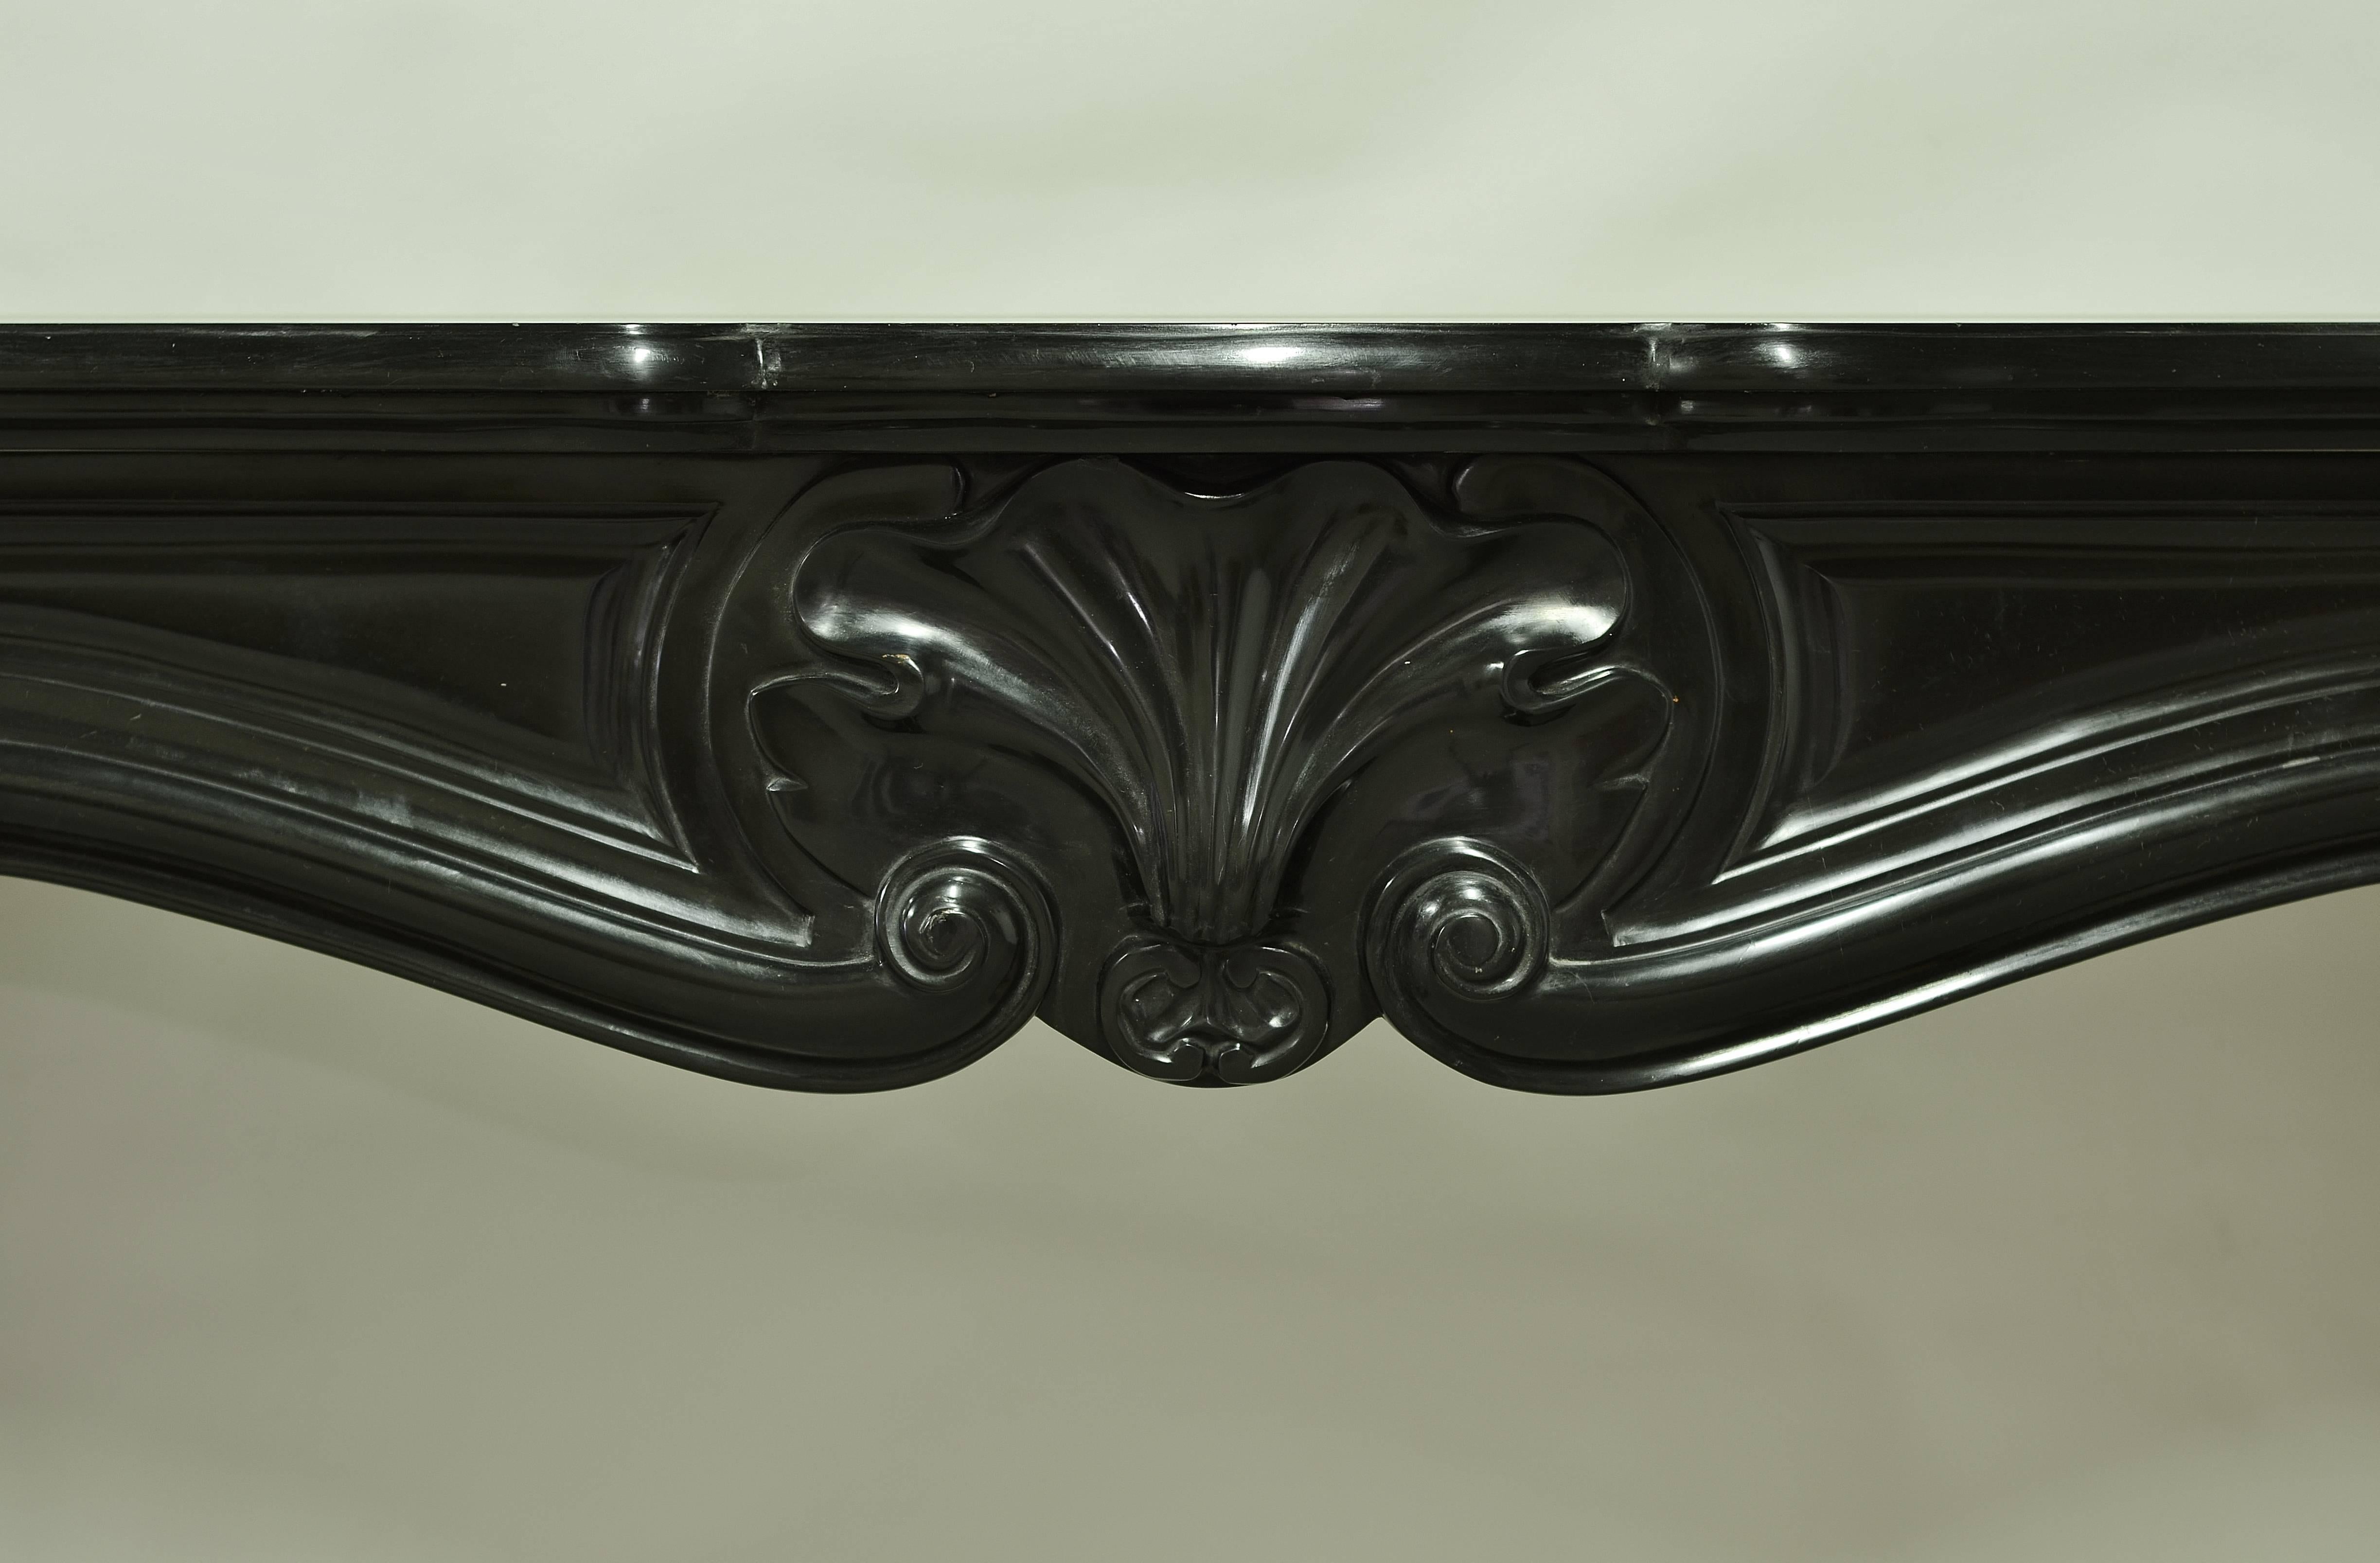 Beautiful 19th century Louis XV fireplace, the deep black marble is in perfect original condition.
Ready to be shipped and installed. 

Opening measurements: 35.4 x 39.9 inch (height x width).